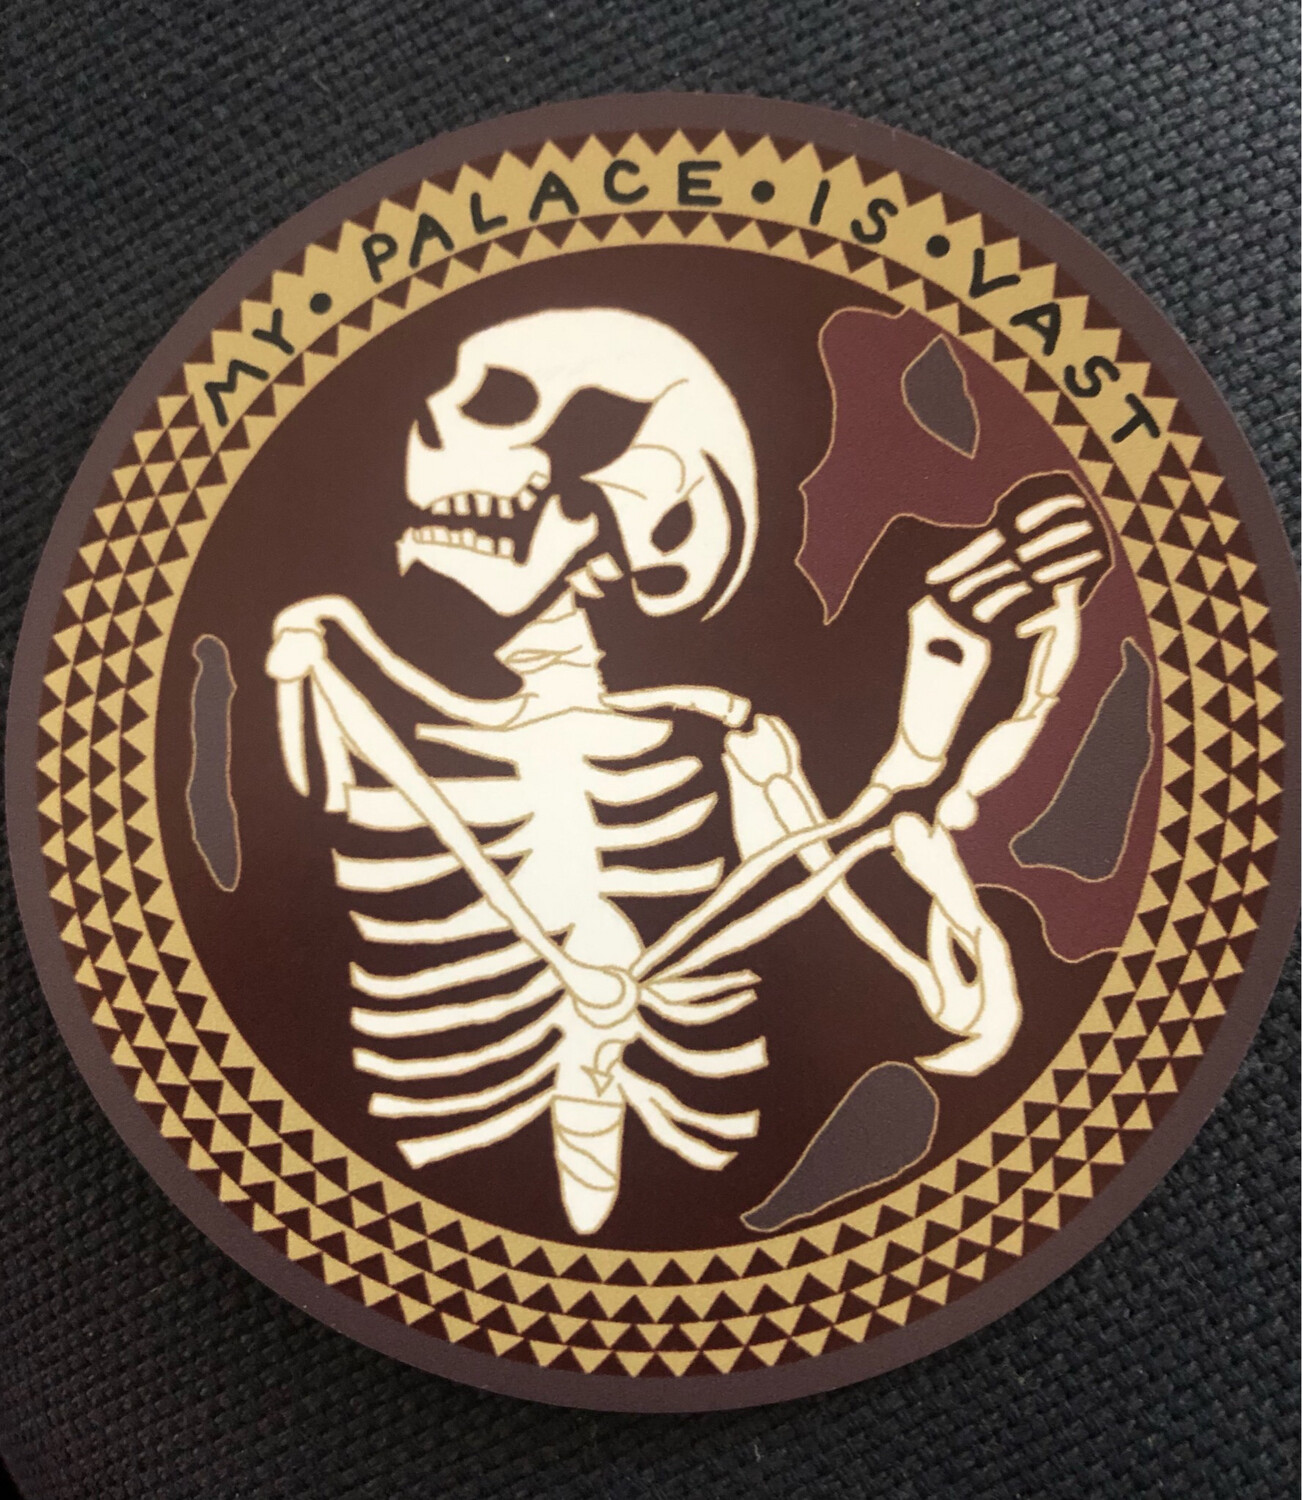 The Norman Chapel Skeleton Hannibal Mind Palace Magnet